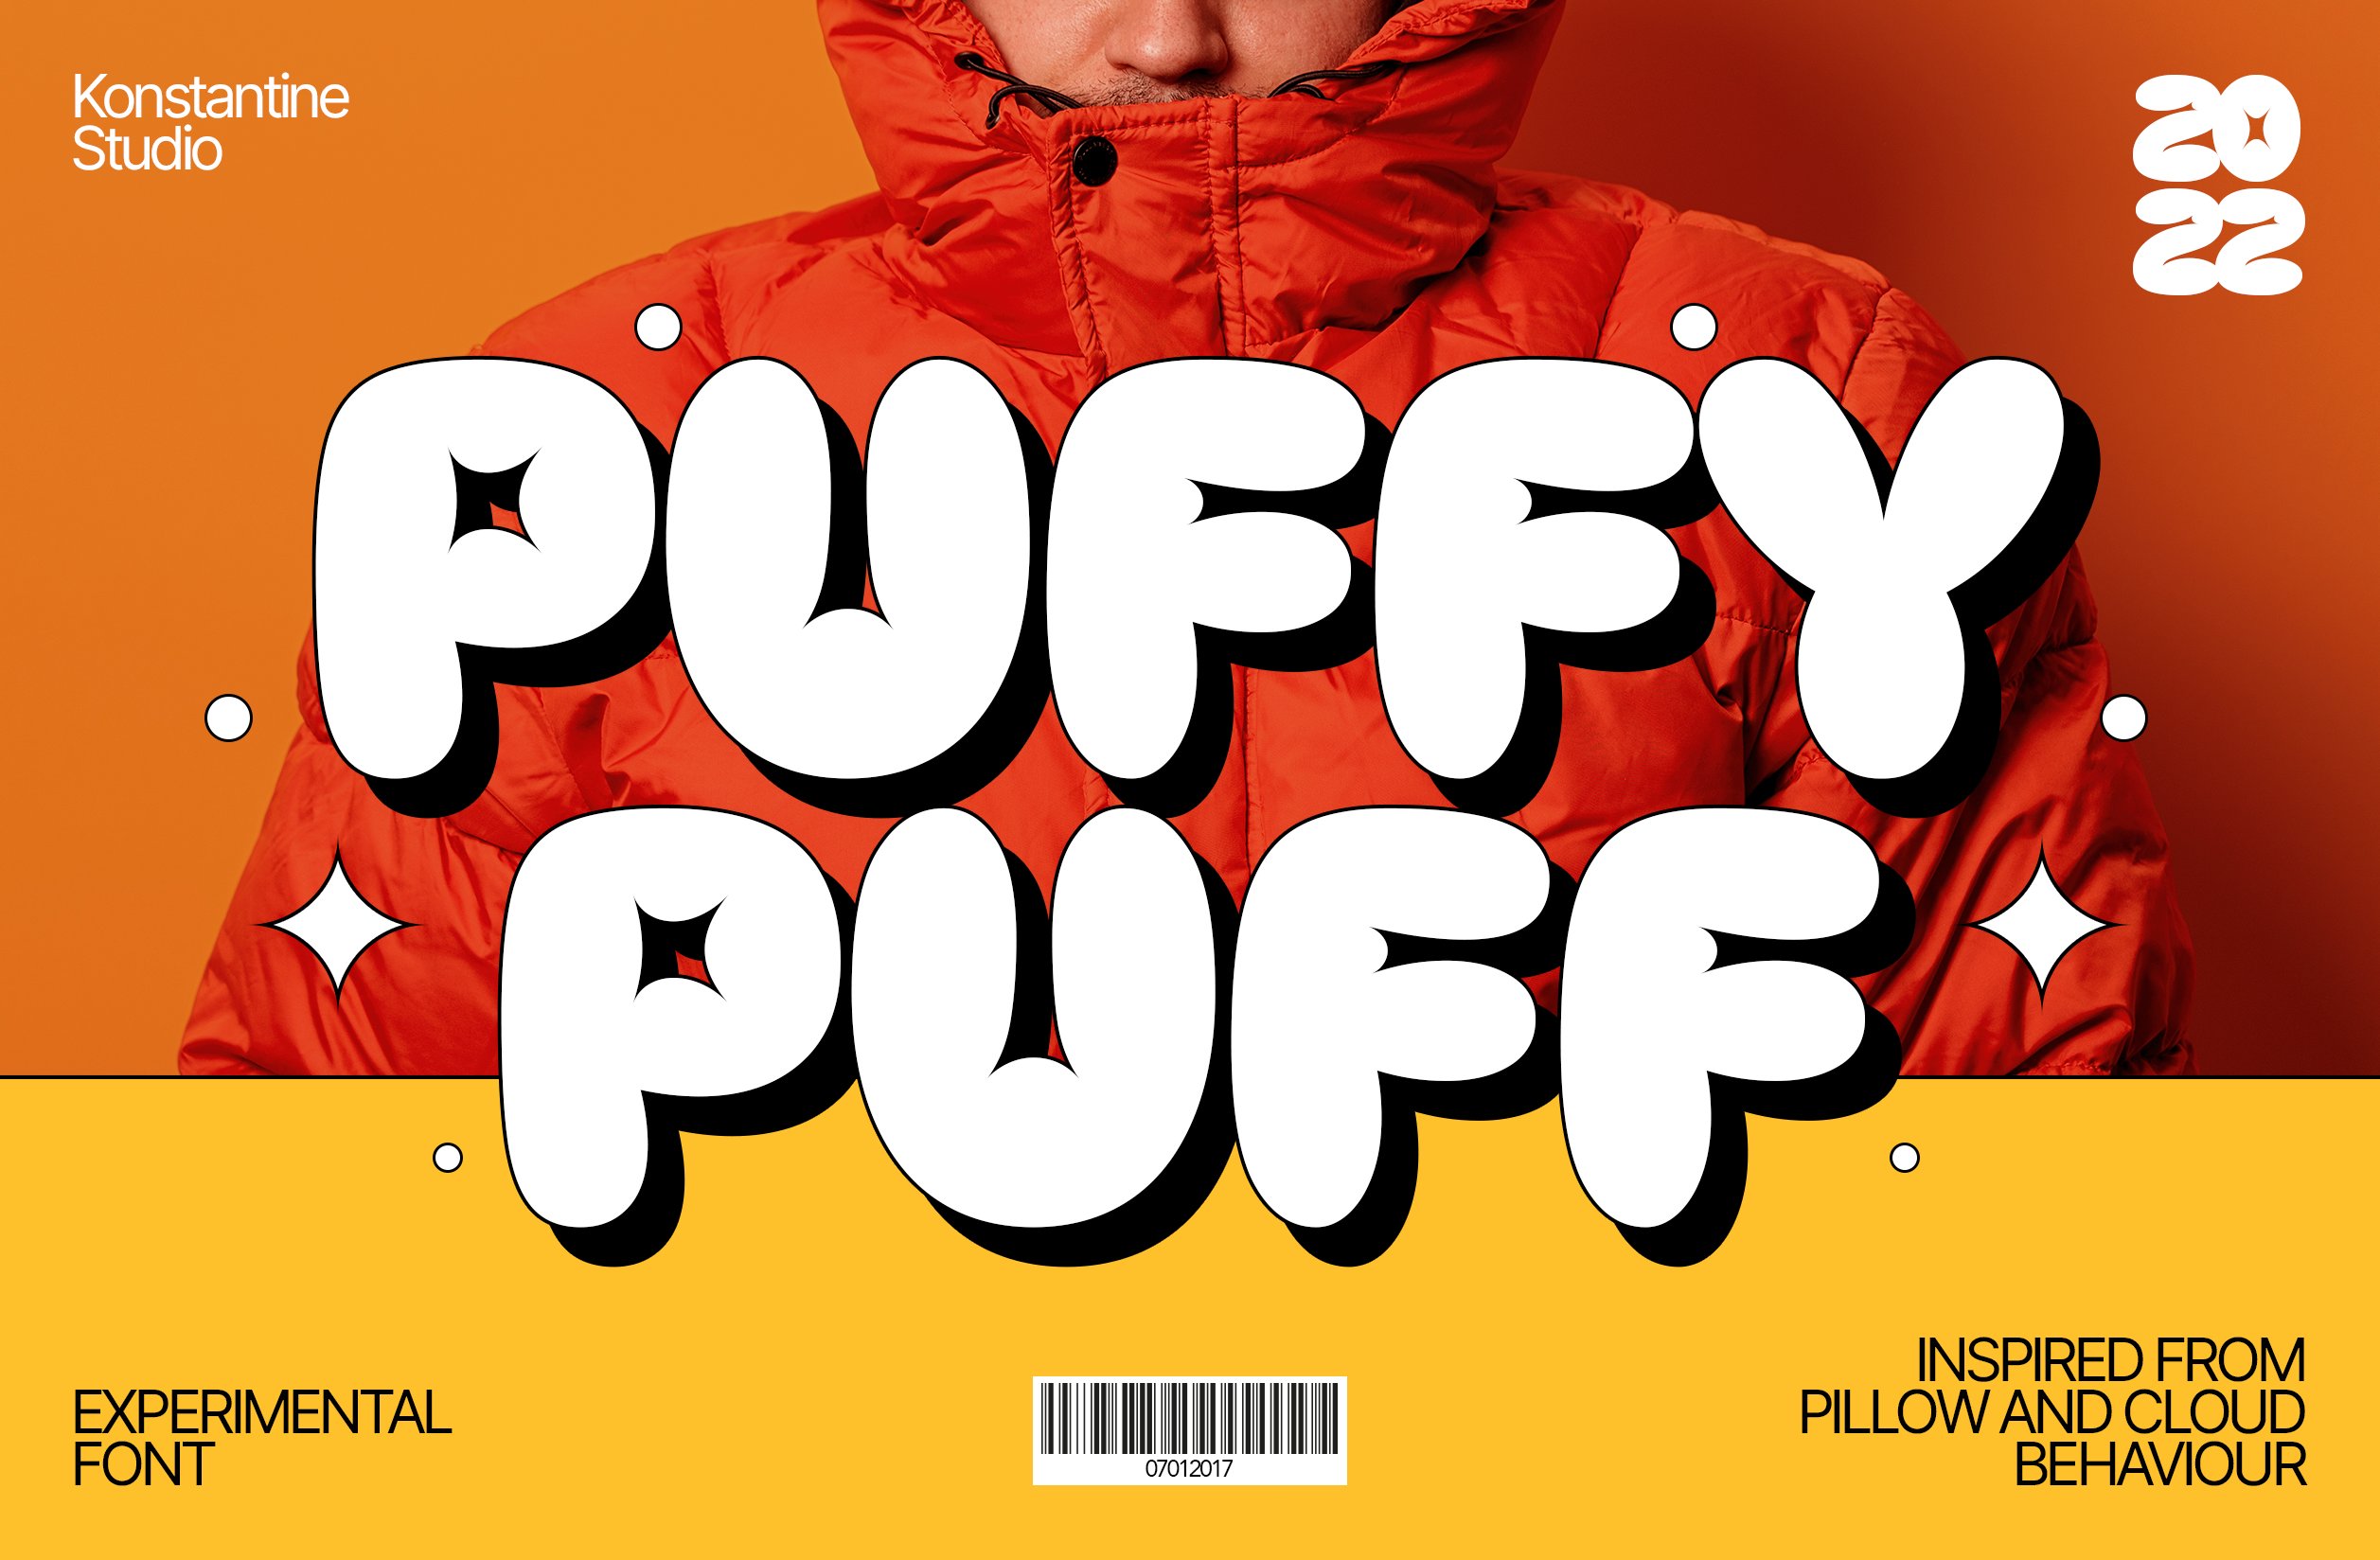 Puffypuff - Bubble Pop Display Fonts cover image.